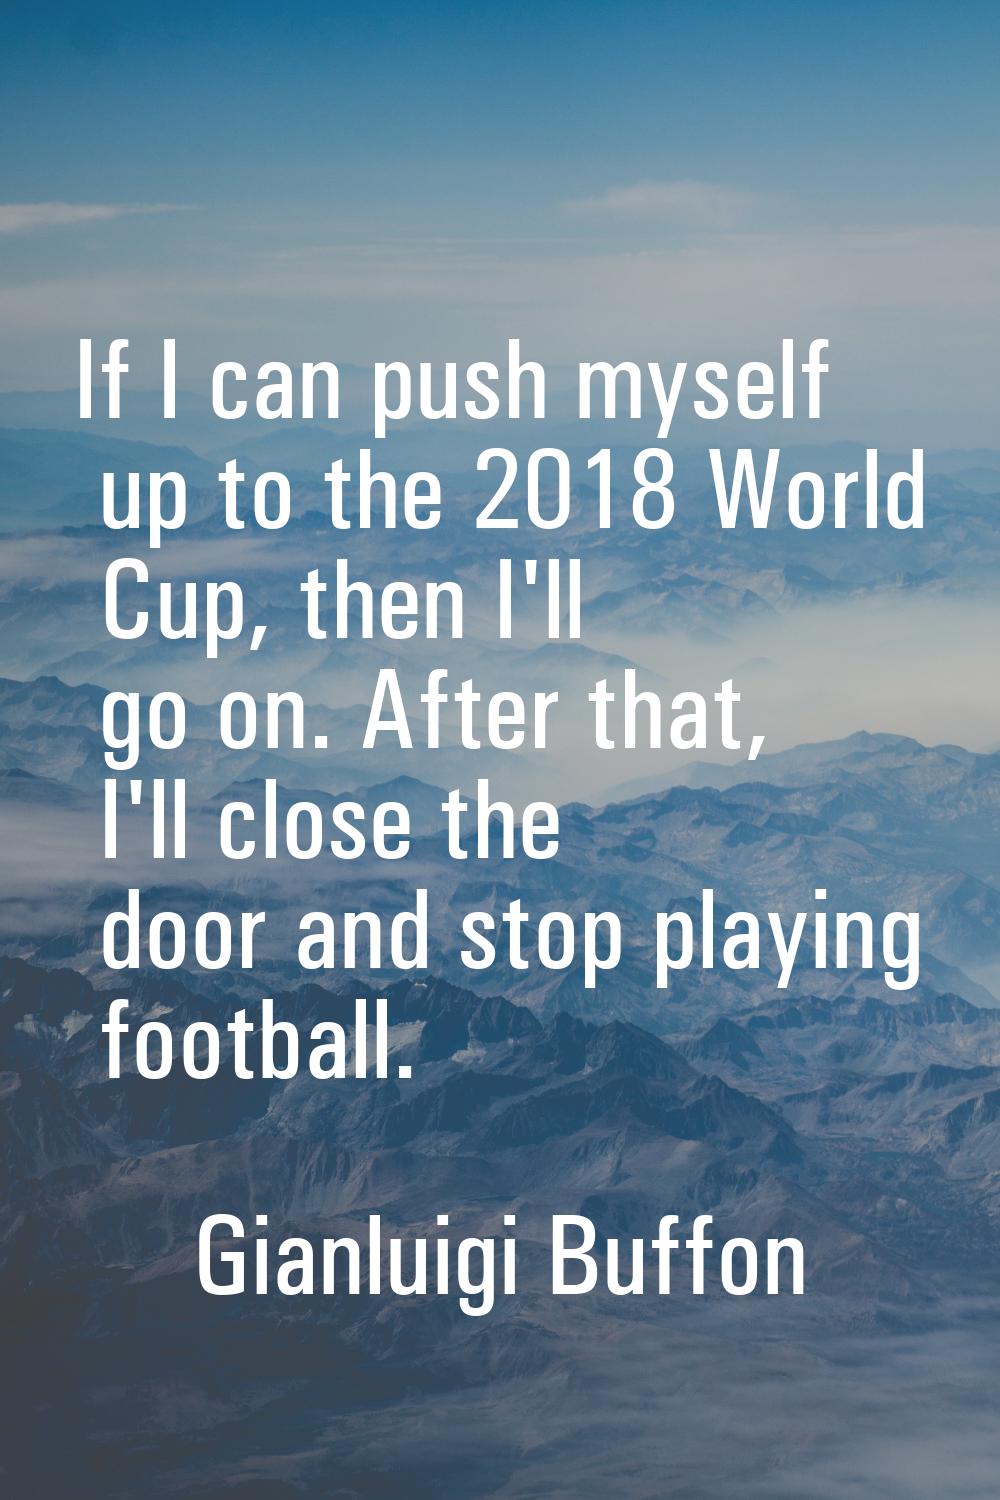 If I can push myself up to the 2018 World Cup, then I'll go on. After that, I'll close the door and